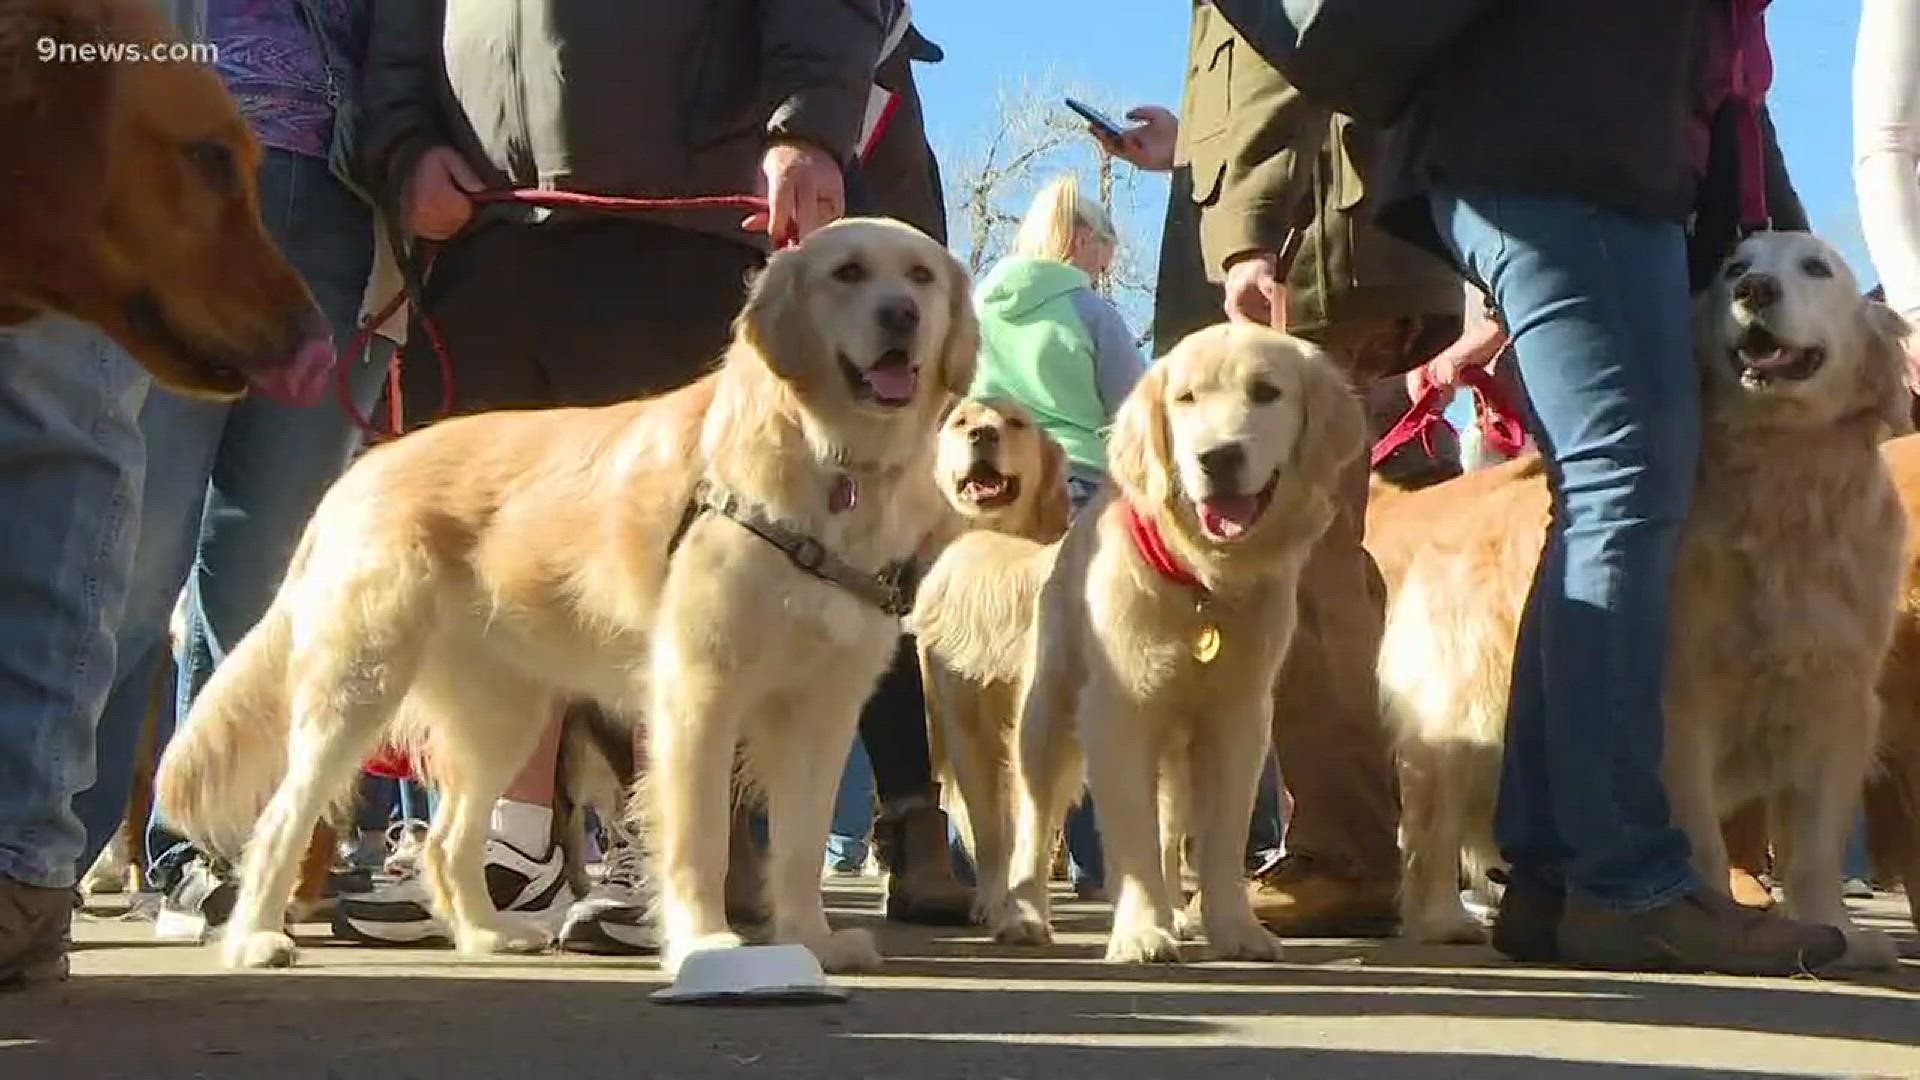 Organizers told 9NEWS that likely 1,500 goldens managed to brave the gorgeous Golden weather to visit and basically take over the main street in the city. Humans and their beloved (and well-behaved) golden retrievers were invited to first gather at the Golden Visitors Center at noon for a free photo and some treats.